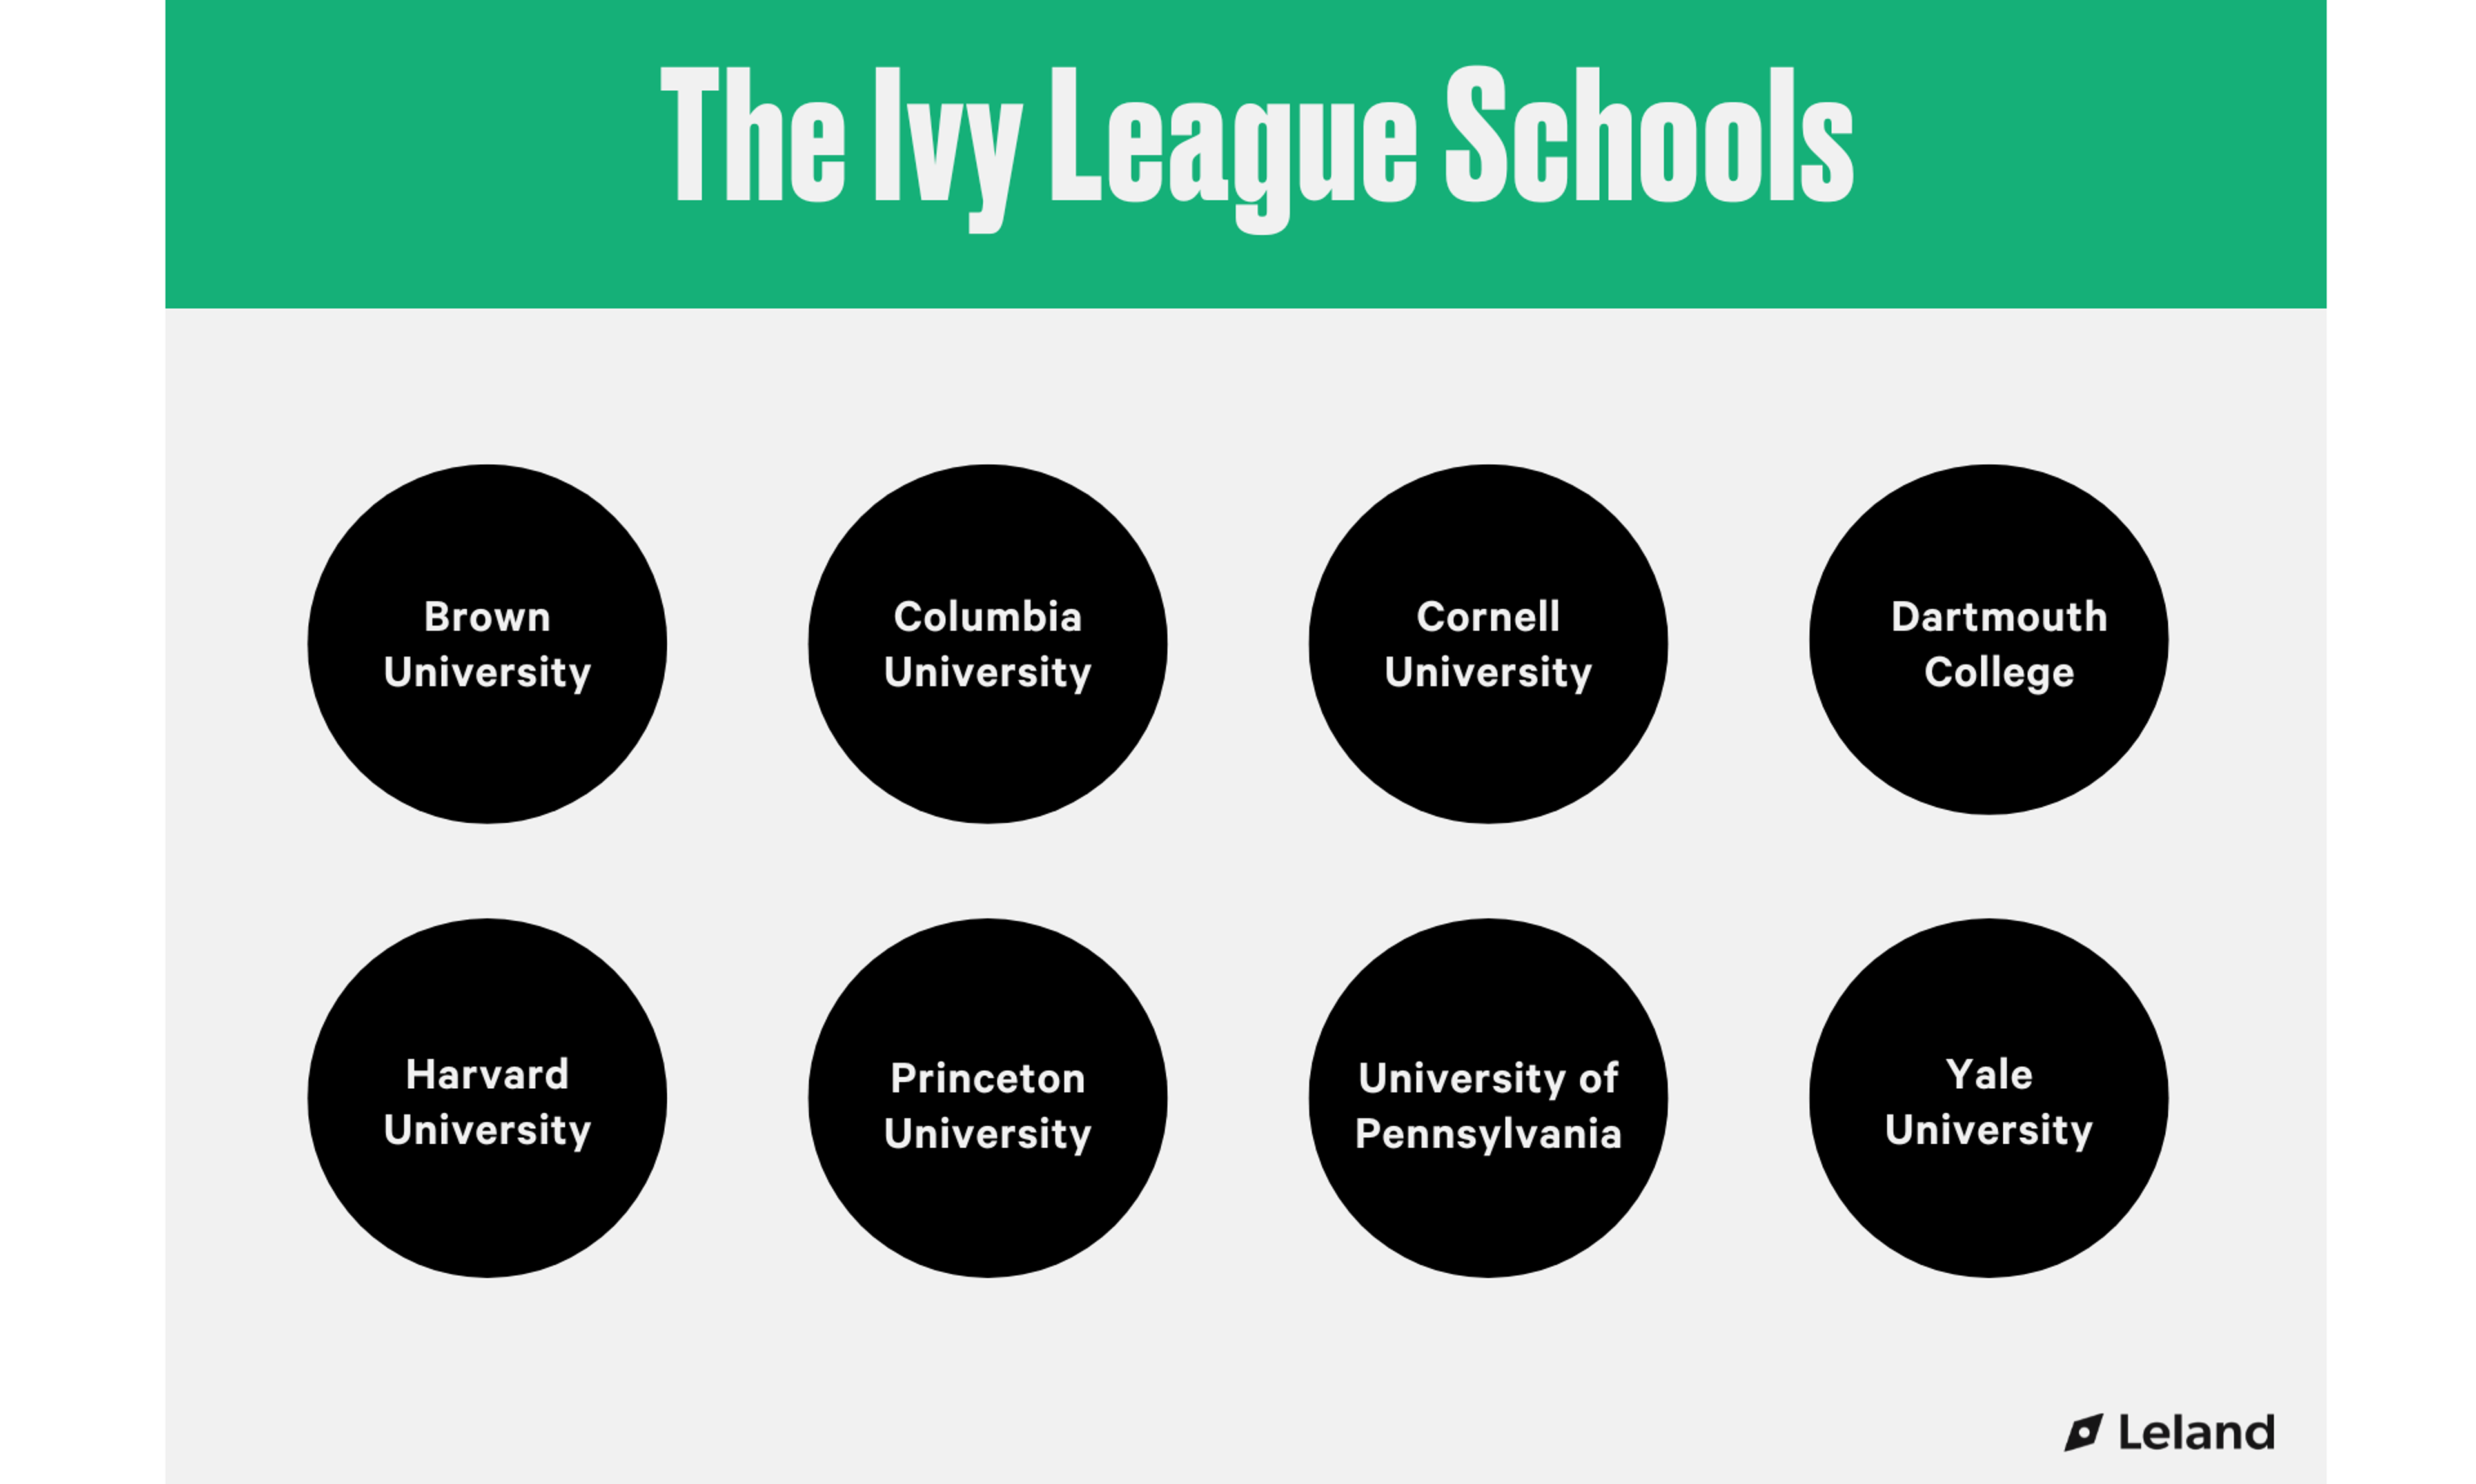 What are Ivy League Schools - Application Process in Ivy League